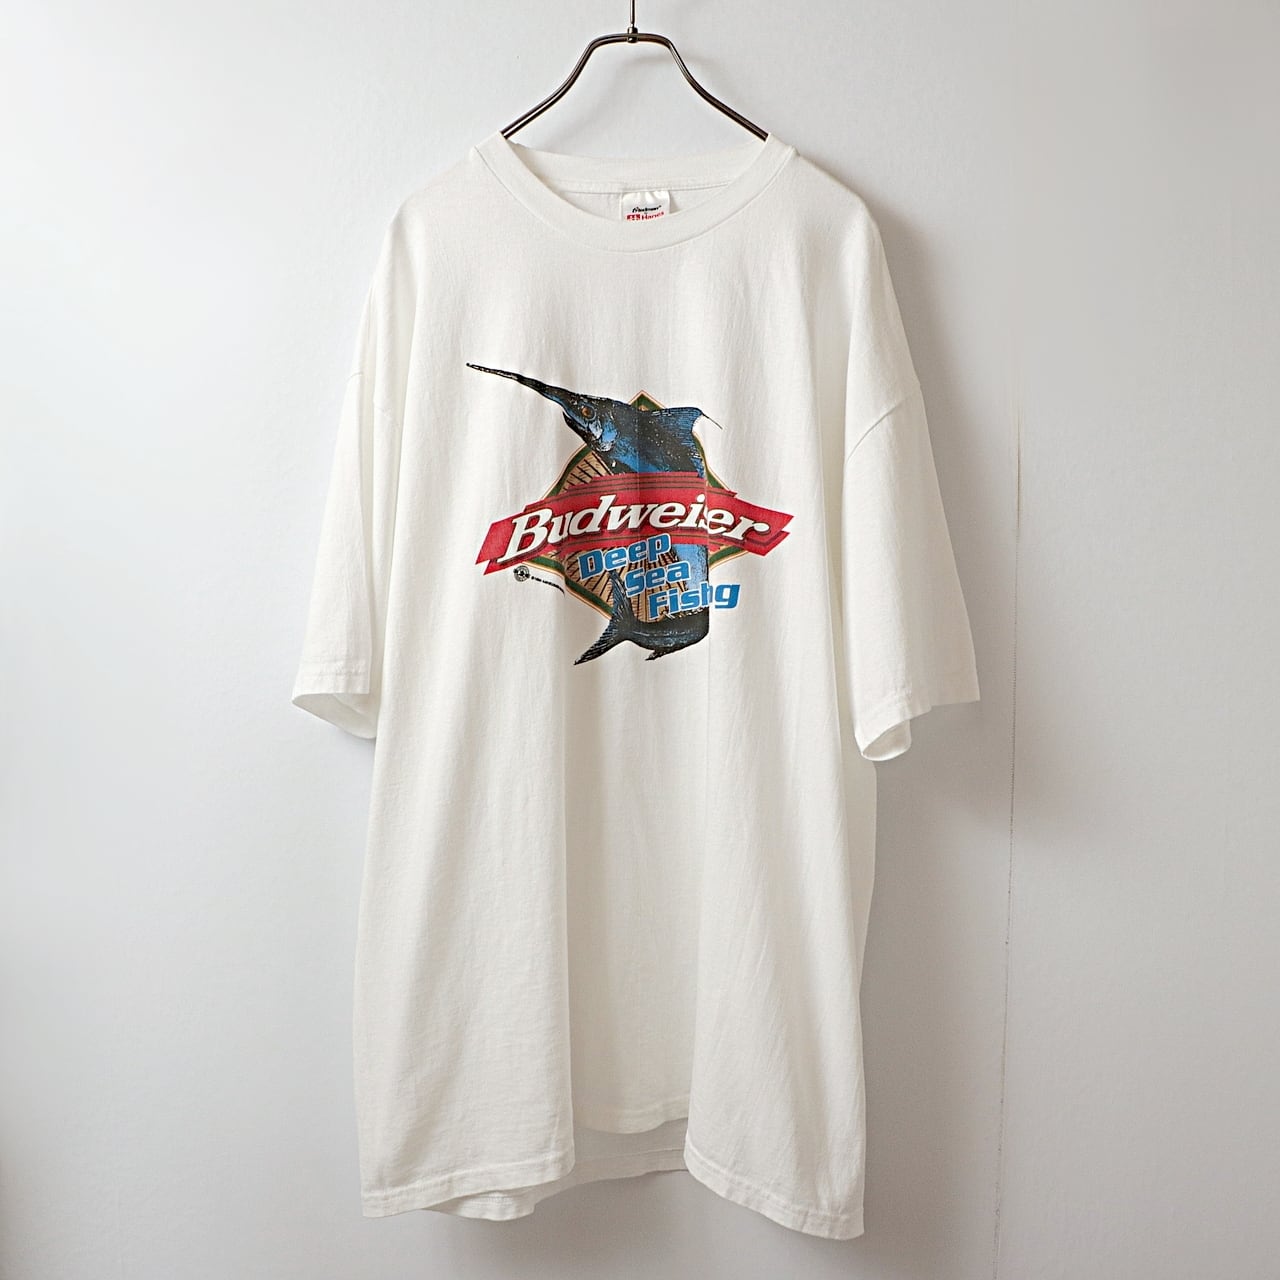 90s Budweiser バドワイザー カジキ プリント Tシャツ 古着 used | khaki select clothing powered  by BASE